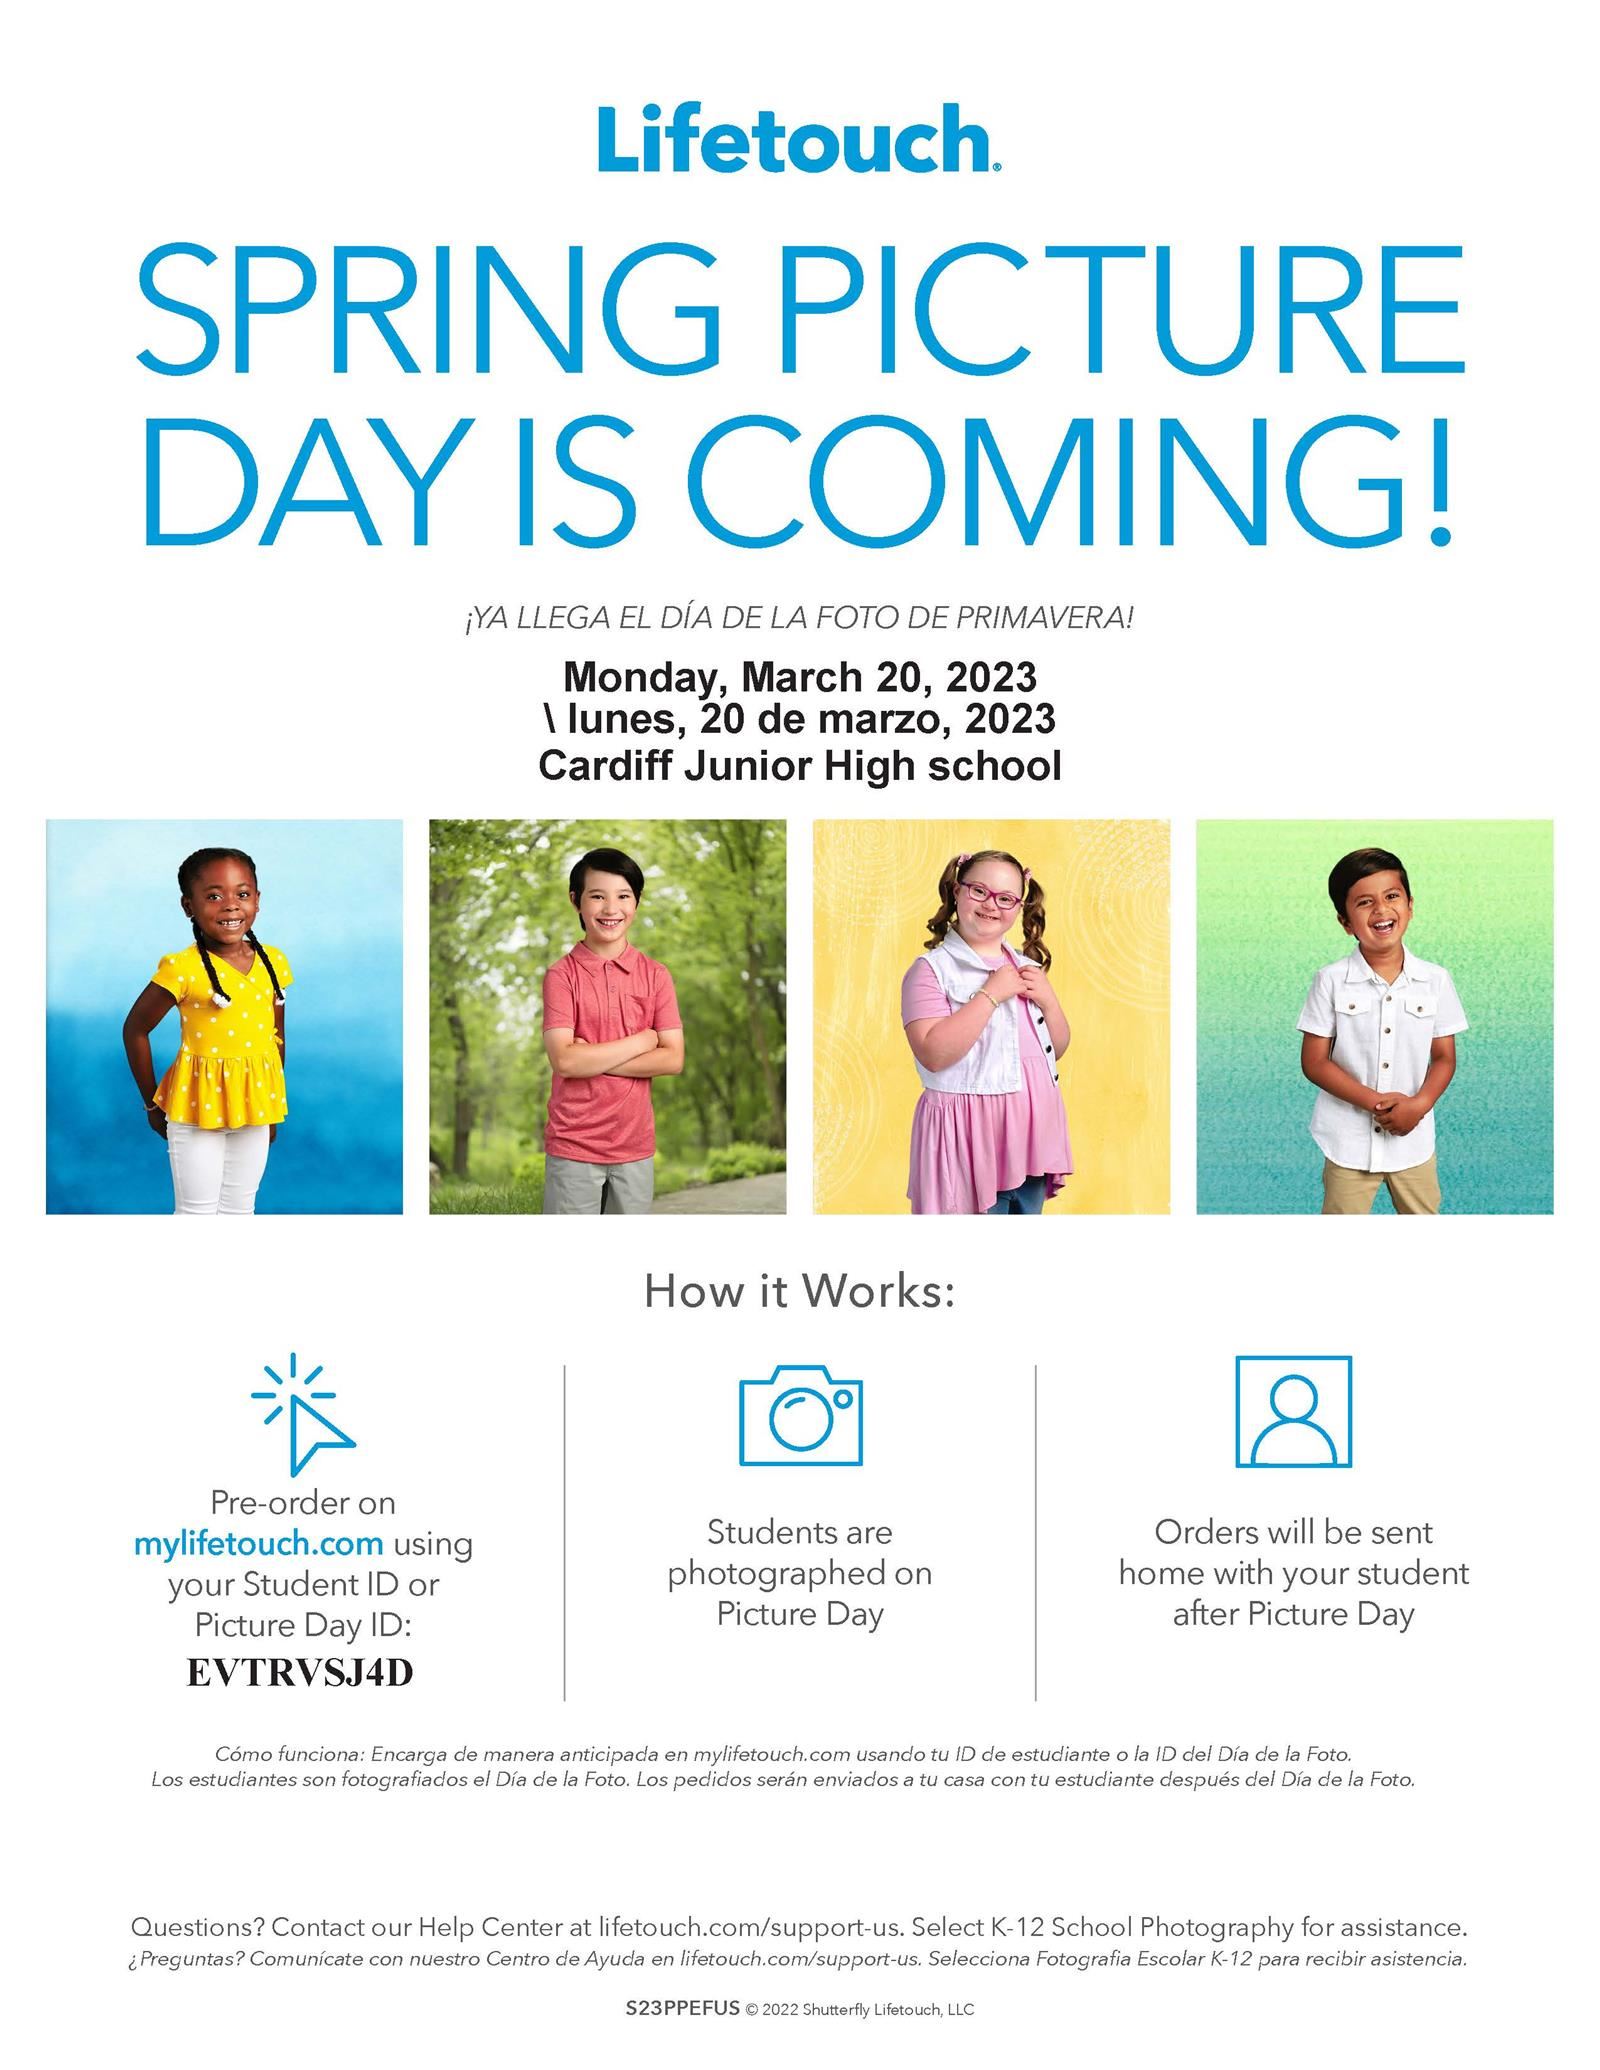 Spring Picture Day is Coming! Monday, March 20, 2023. Preorder on mylifeouch.com using your student ID.